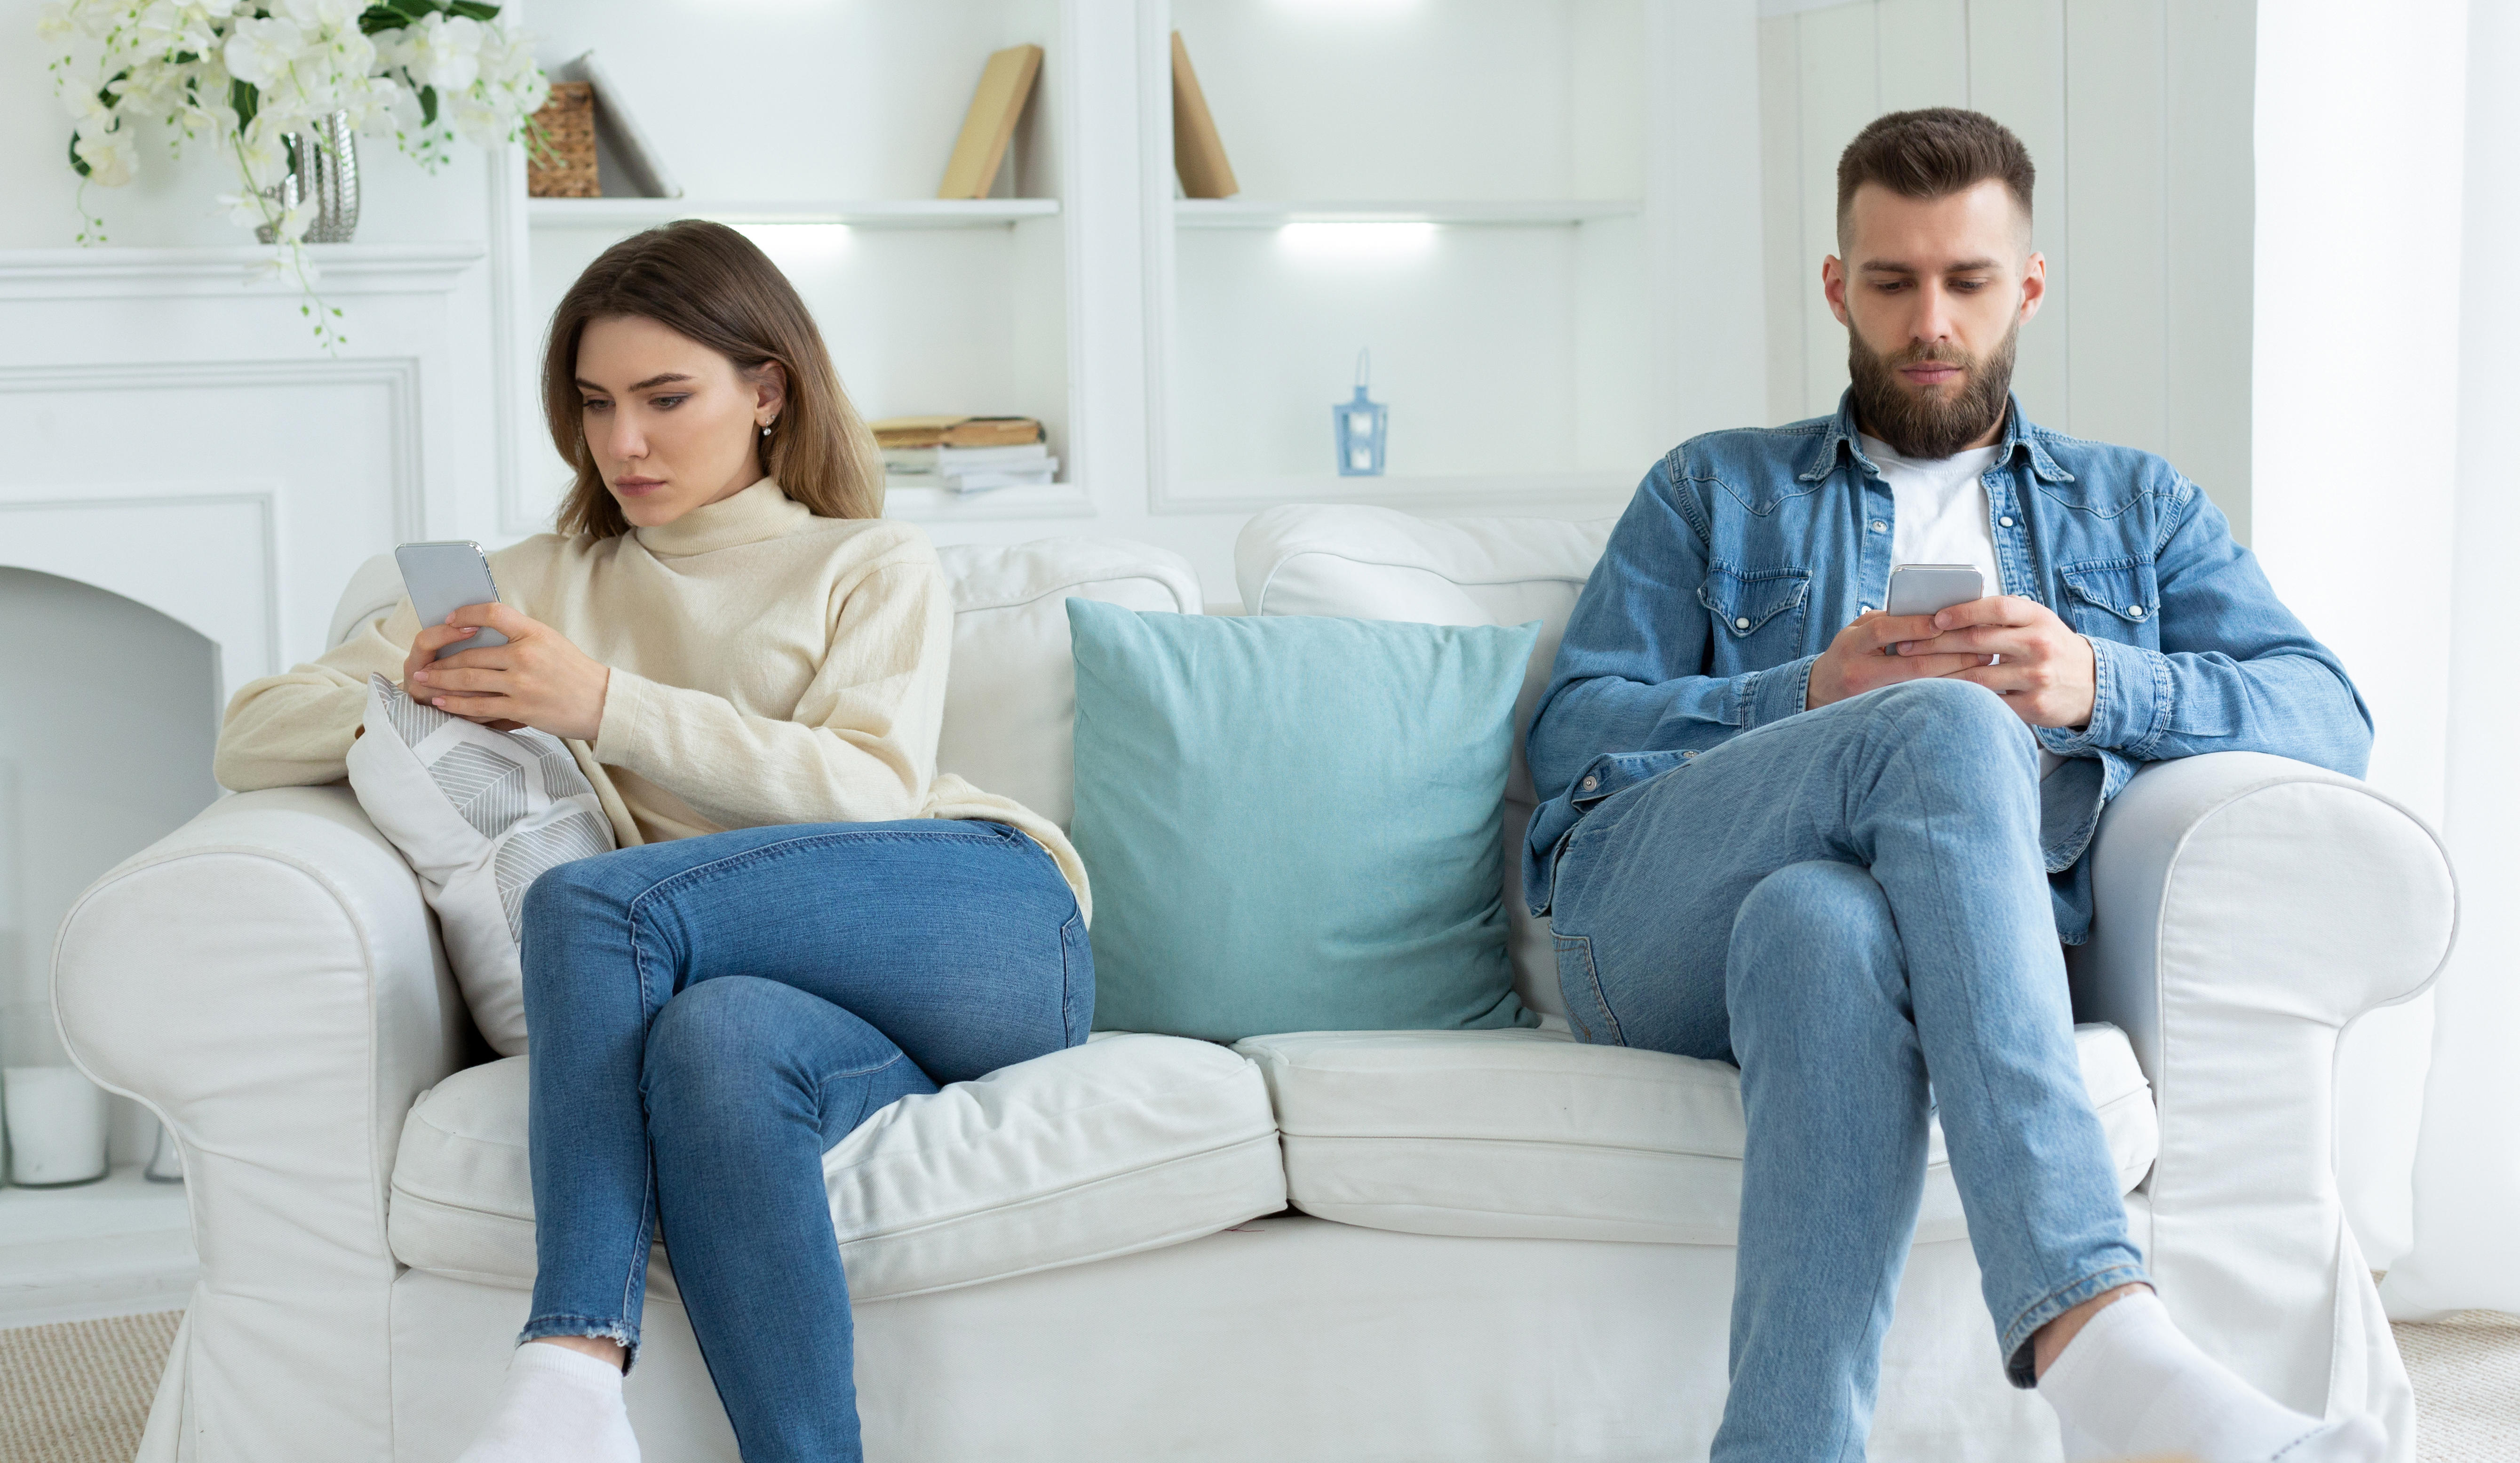 Couple at opposite ends of sofa on their phones